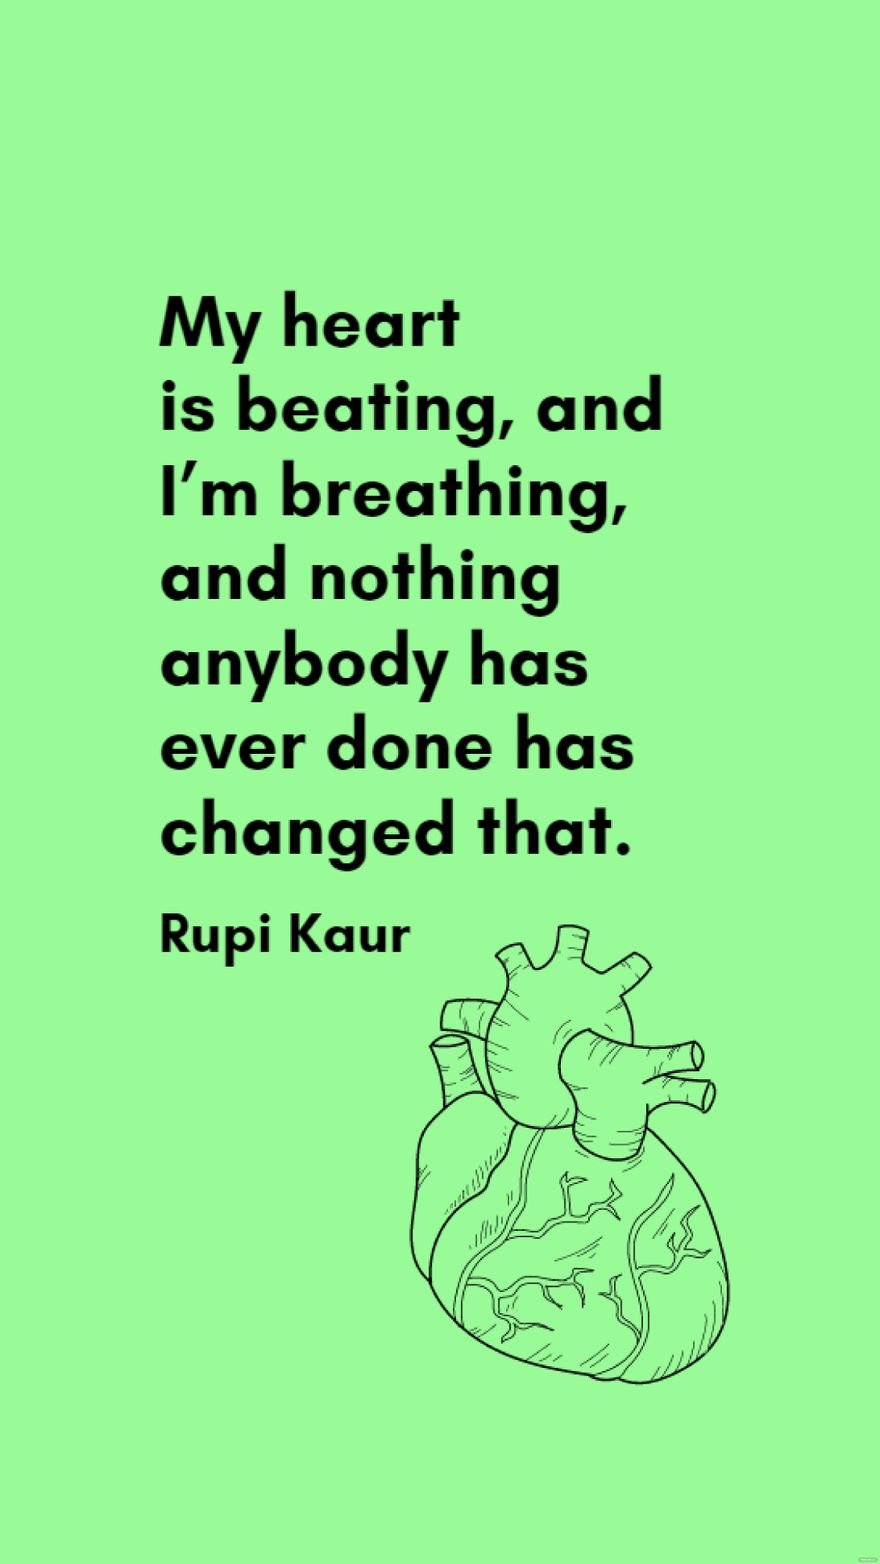 Free Rupi Kaur - My heart is beating, and I’m breathing, and nothing anybody has ever done has changed that. in JPG